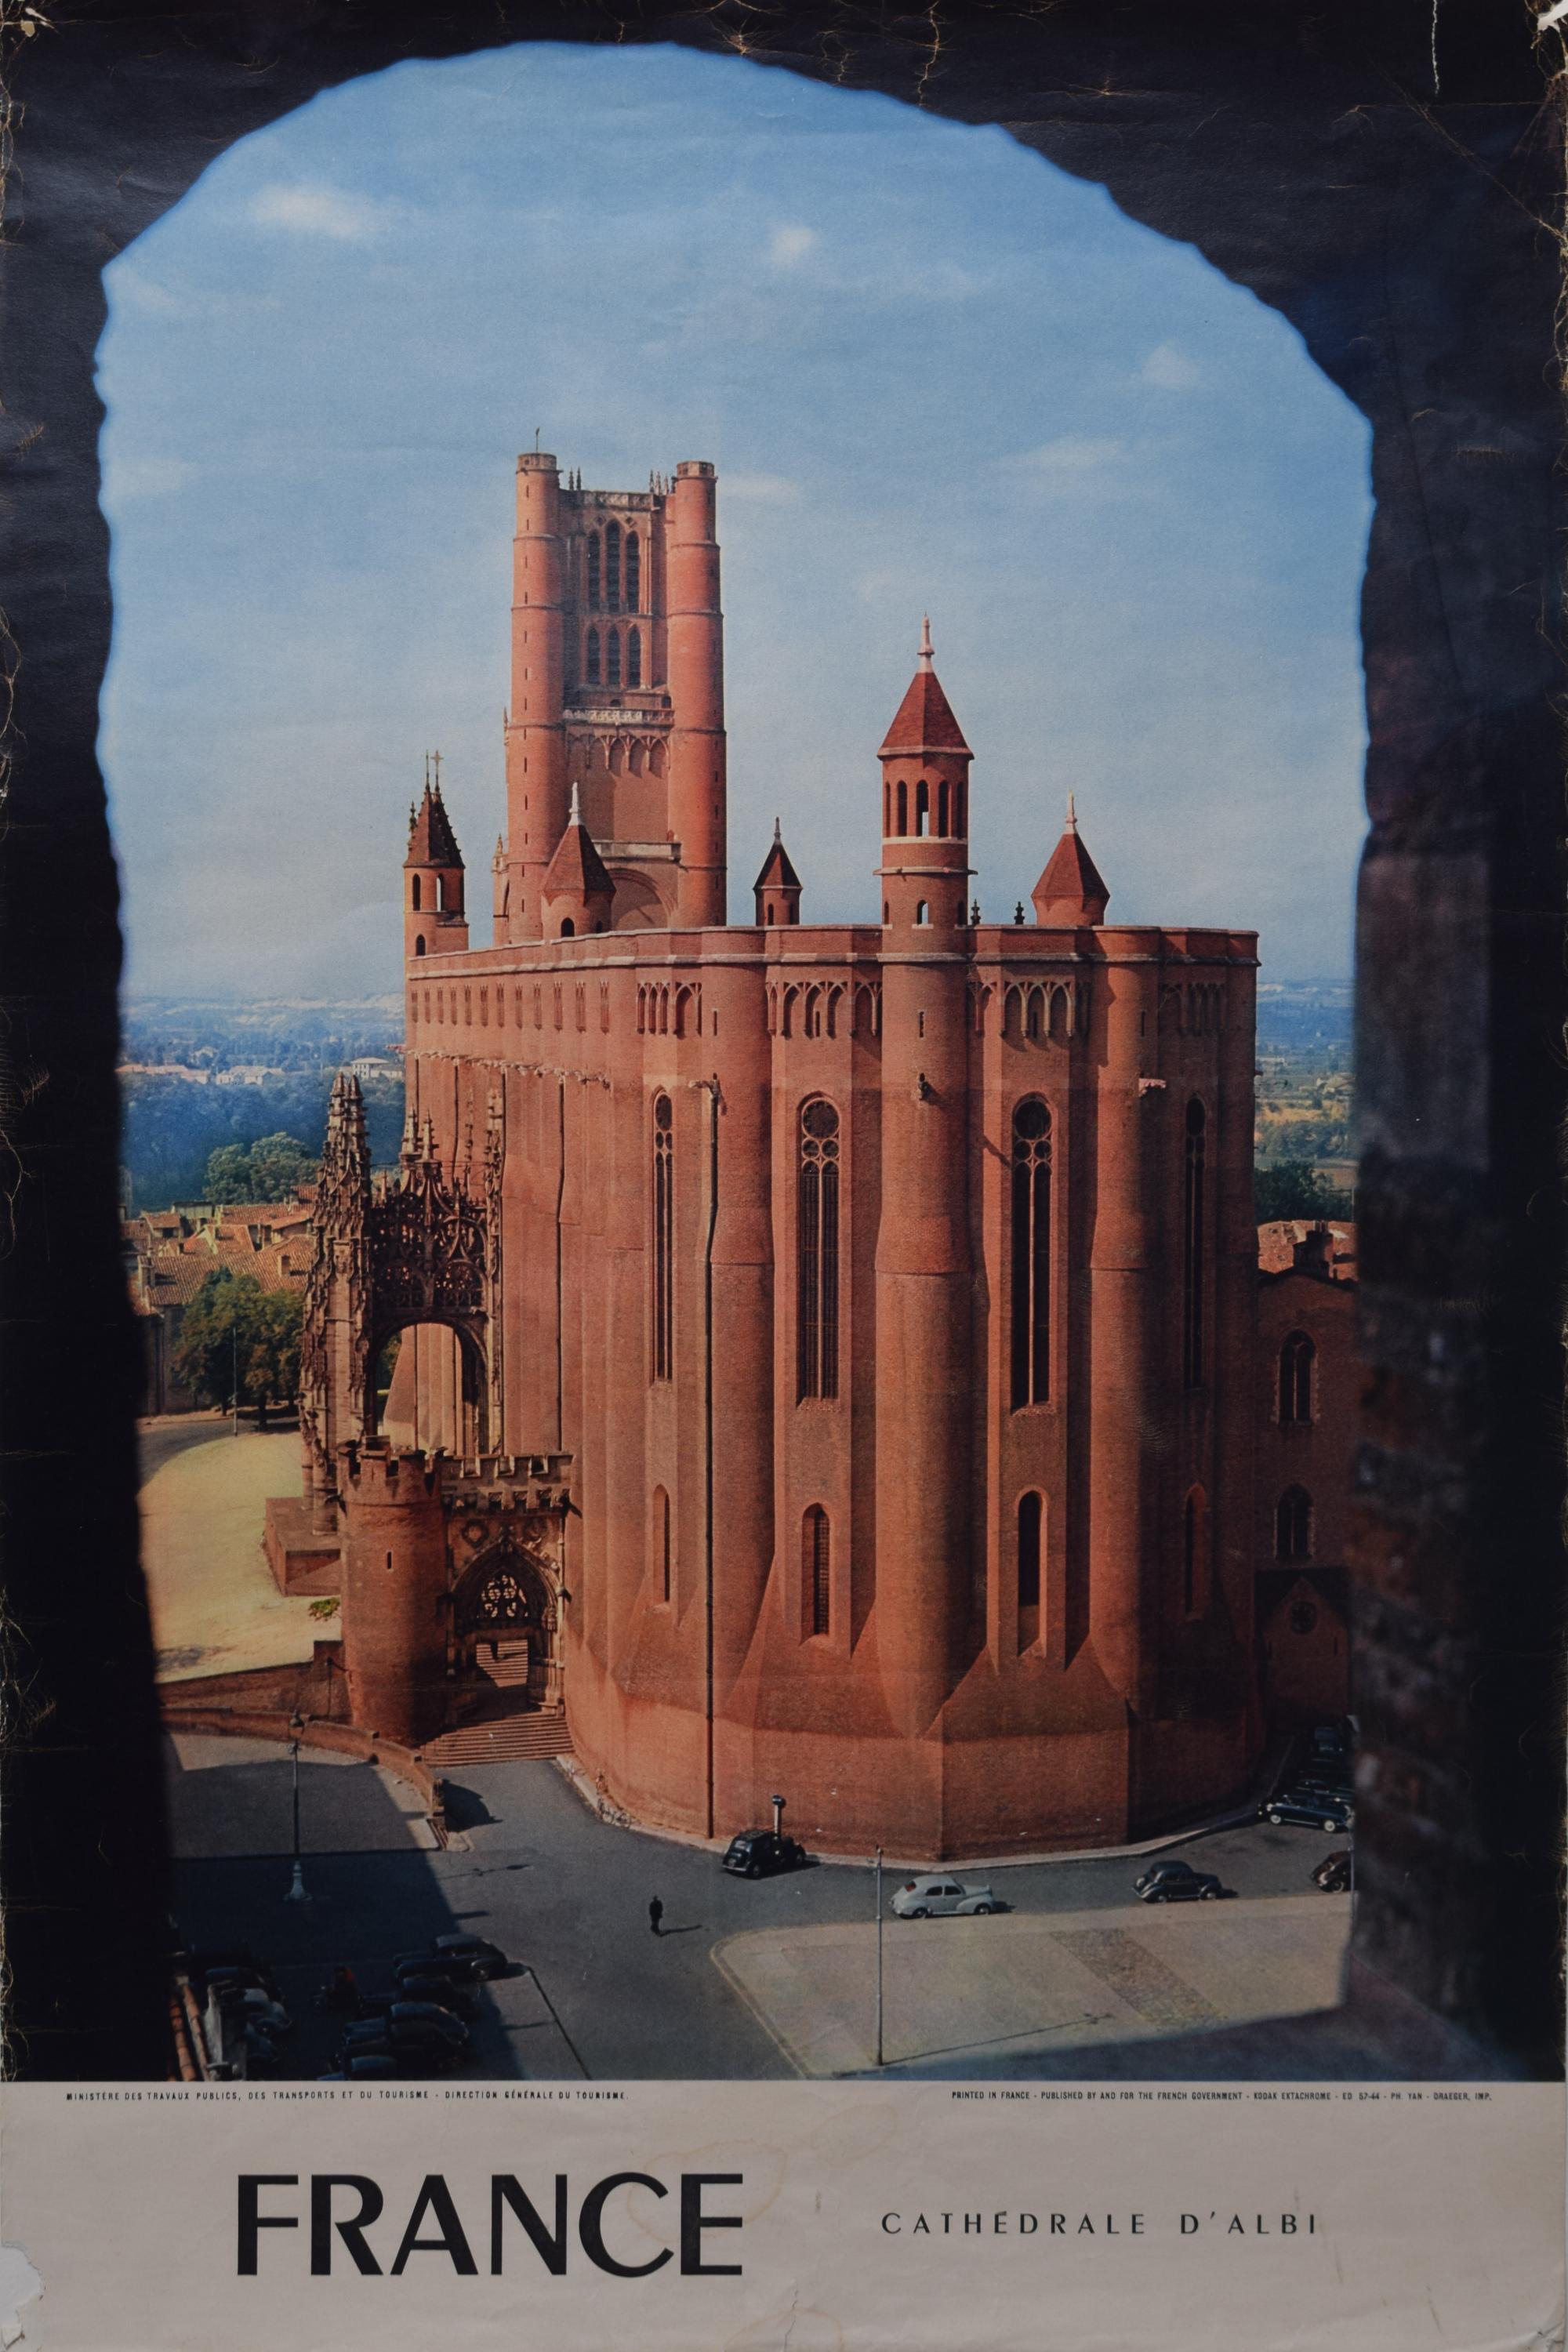 Unknown Landscape Print - France - Cathedral of Albi, Toulouse original vintage poster